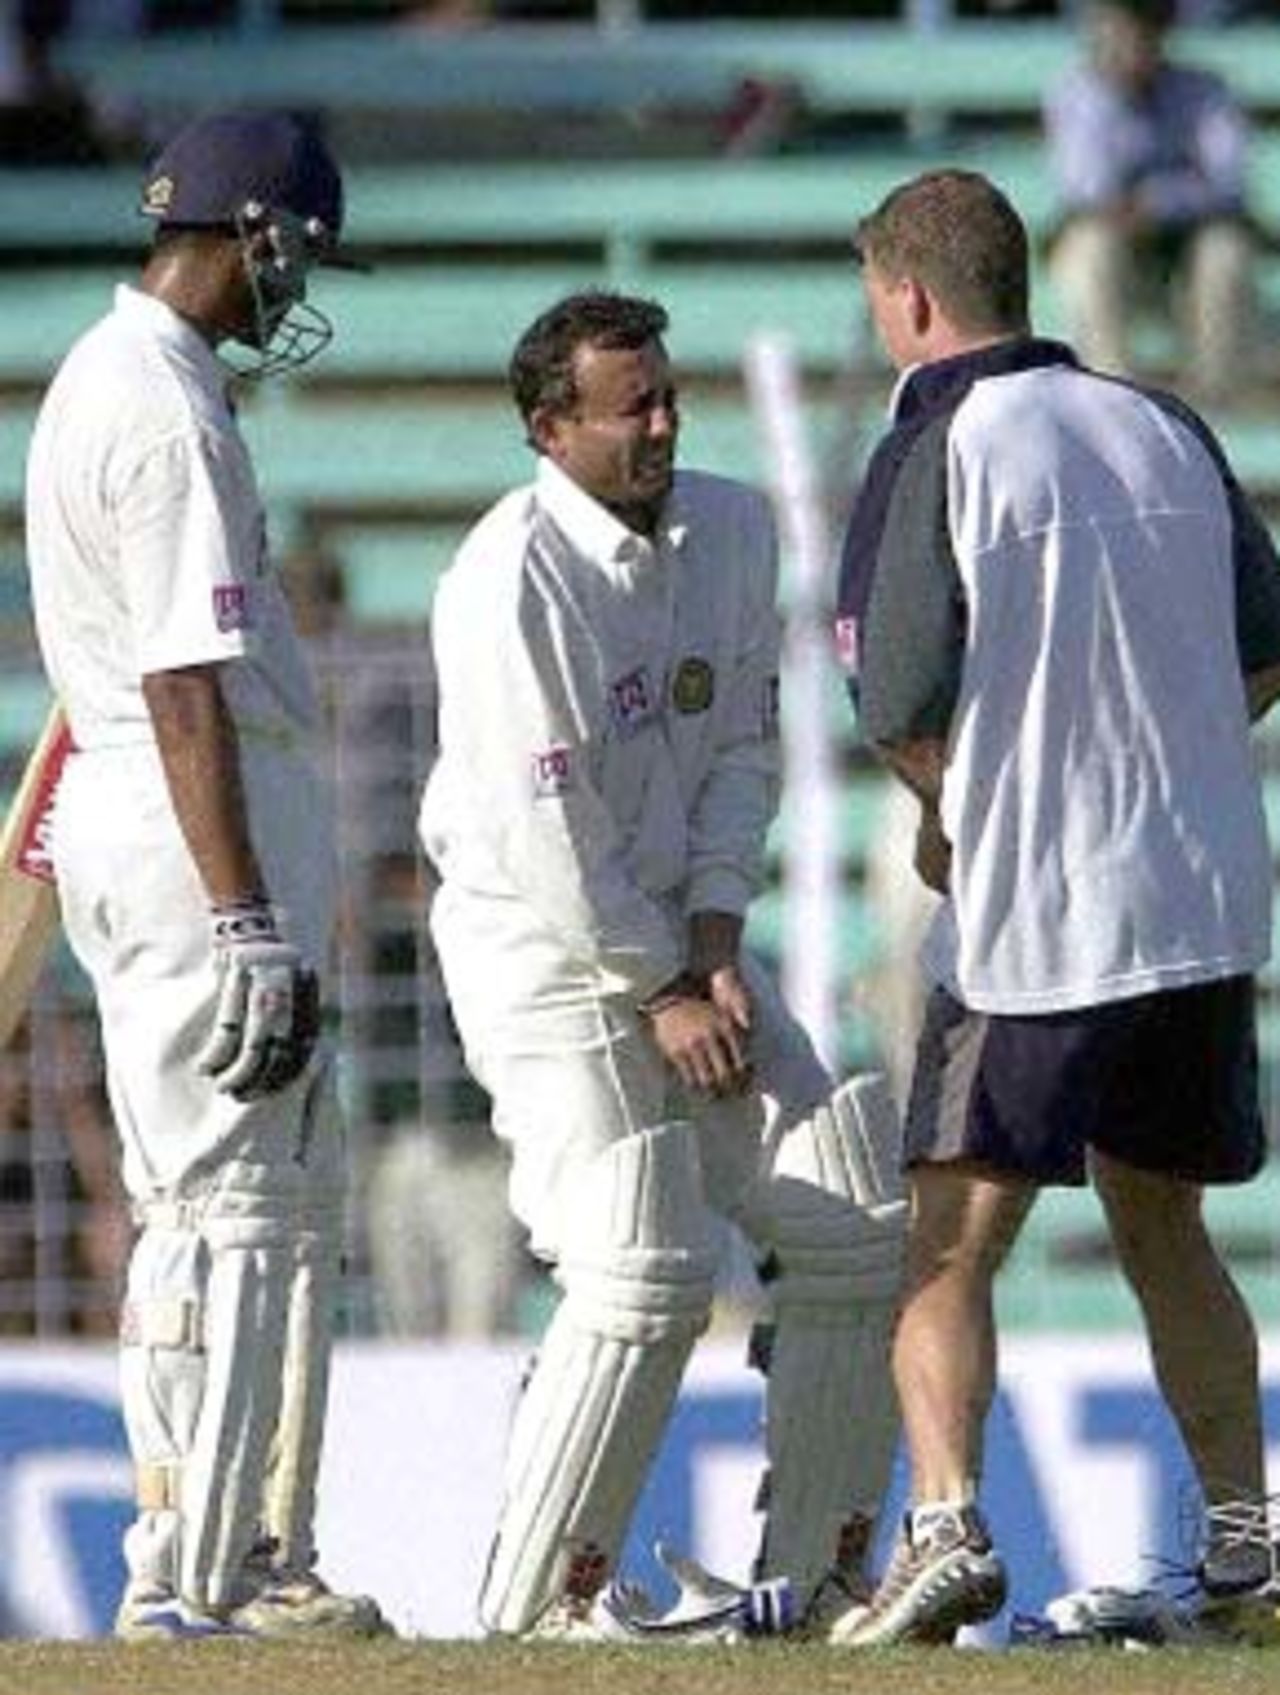 Indian batsman Nayan Mongia (C),tended by the team's physio Andrew Leipus (R), grimaces in pain after being hit by a delivery from Australian speedster Jason Gillespie, while team-mate Rahul Dravid looks on during India's second innings on the second day of the first test match between India and Australia at the Wankhade stadium in Mumbai 28 February 2001. India were 58 for 2 at close of play in their second innings after conceding a 173 runs lead to Australia in the first innings.